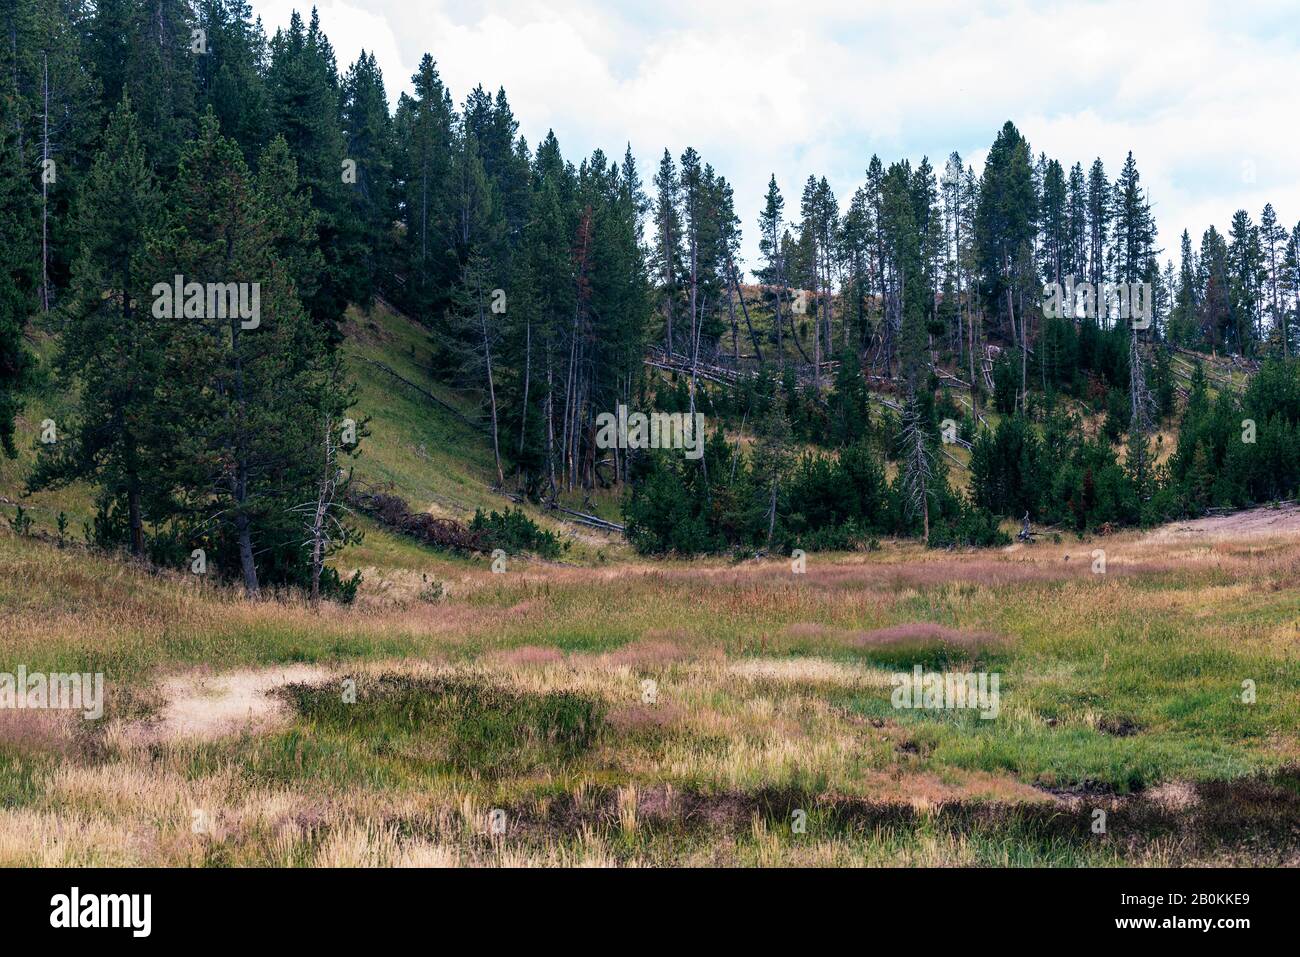 Green grass valley and tall green pine trees on hillside. Stock Photo